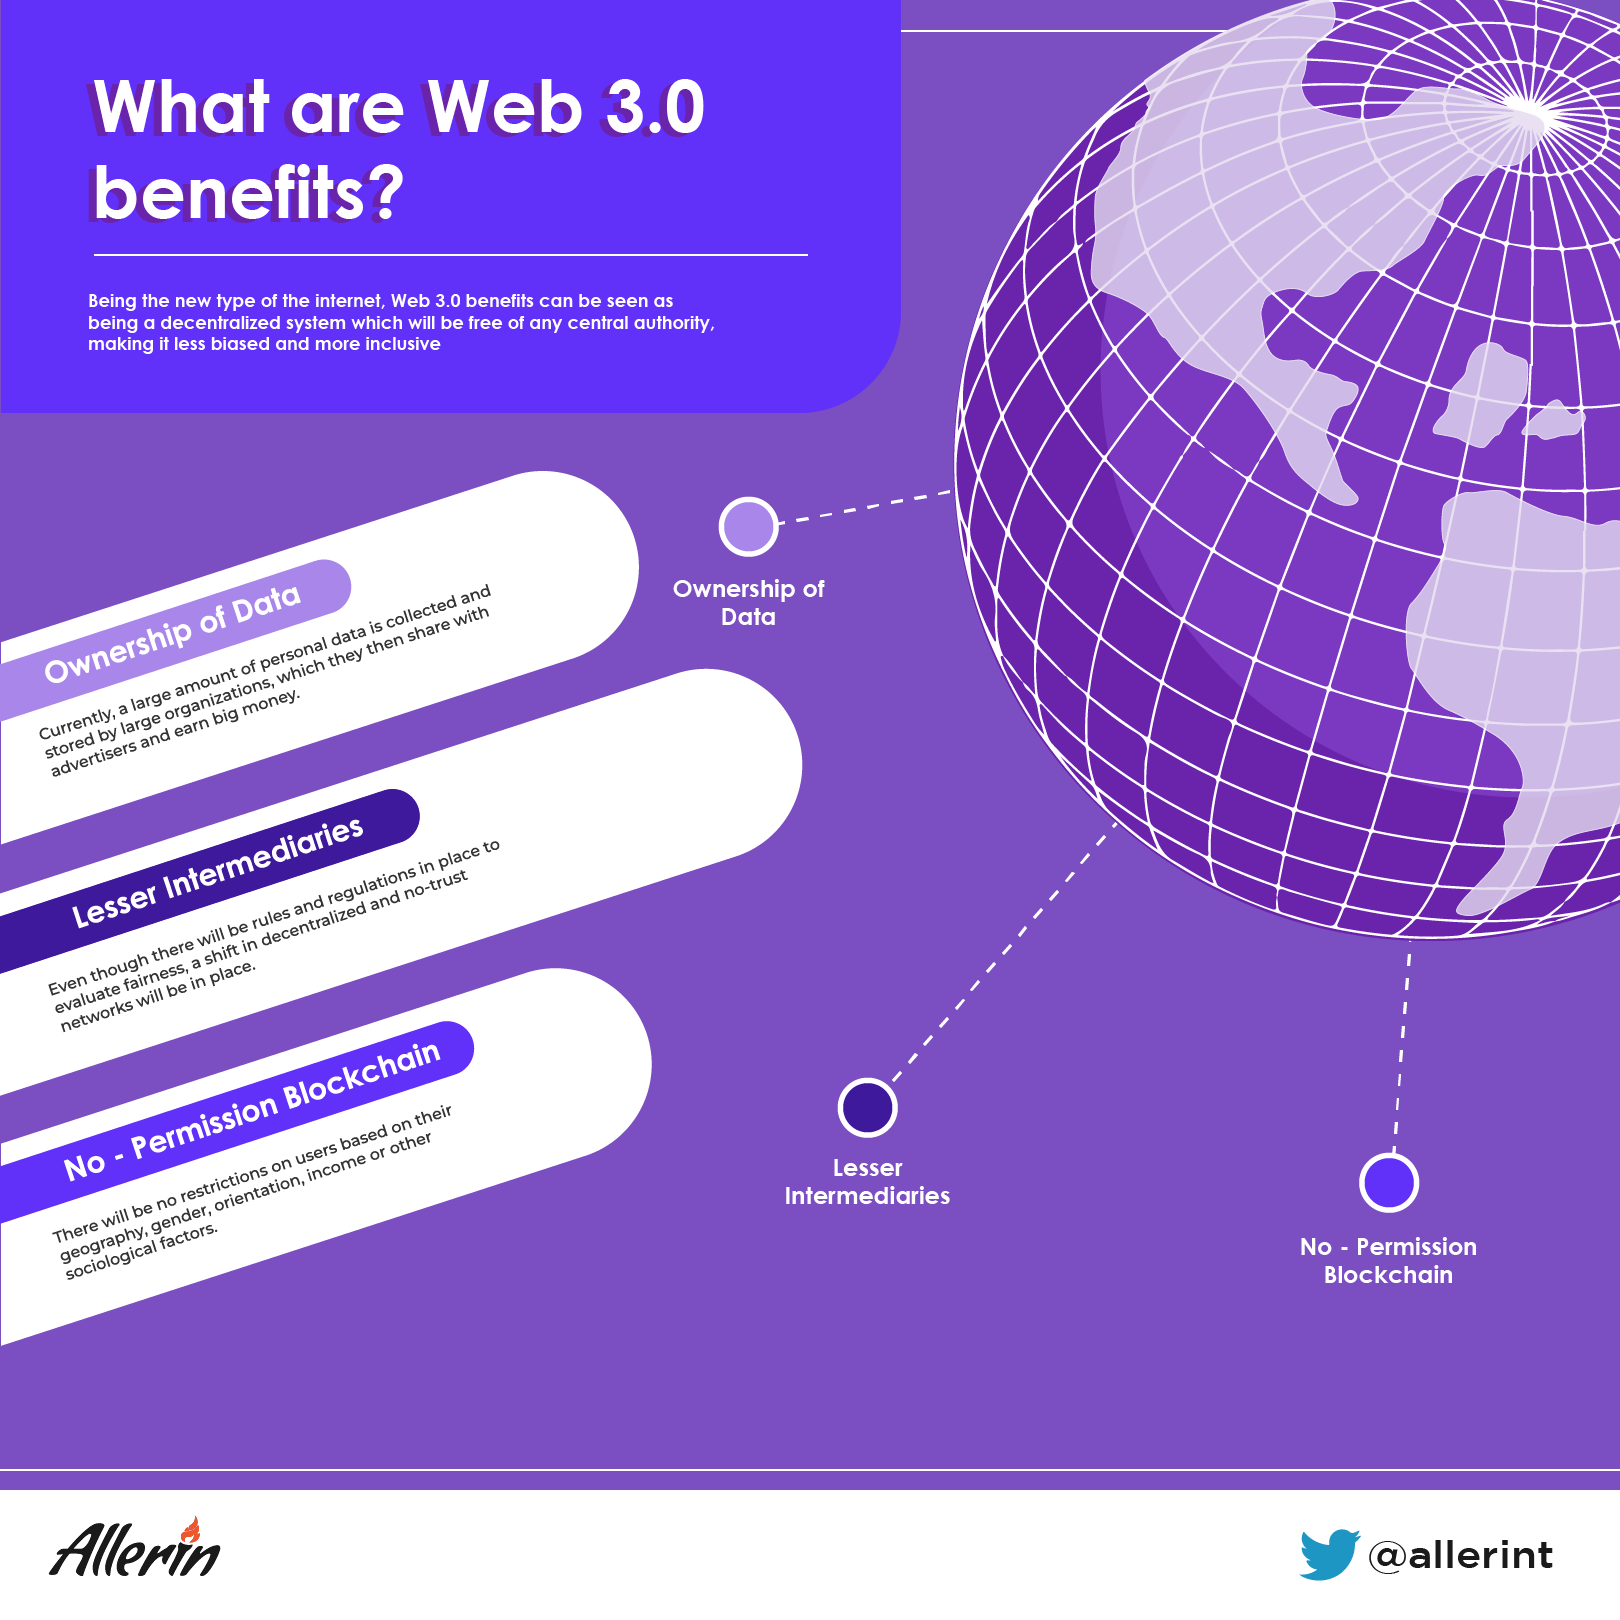 How is Web 3.0 beneficial?